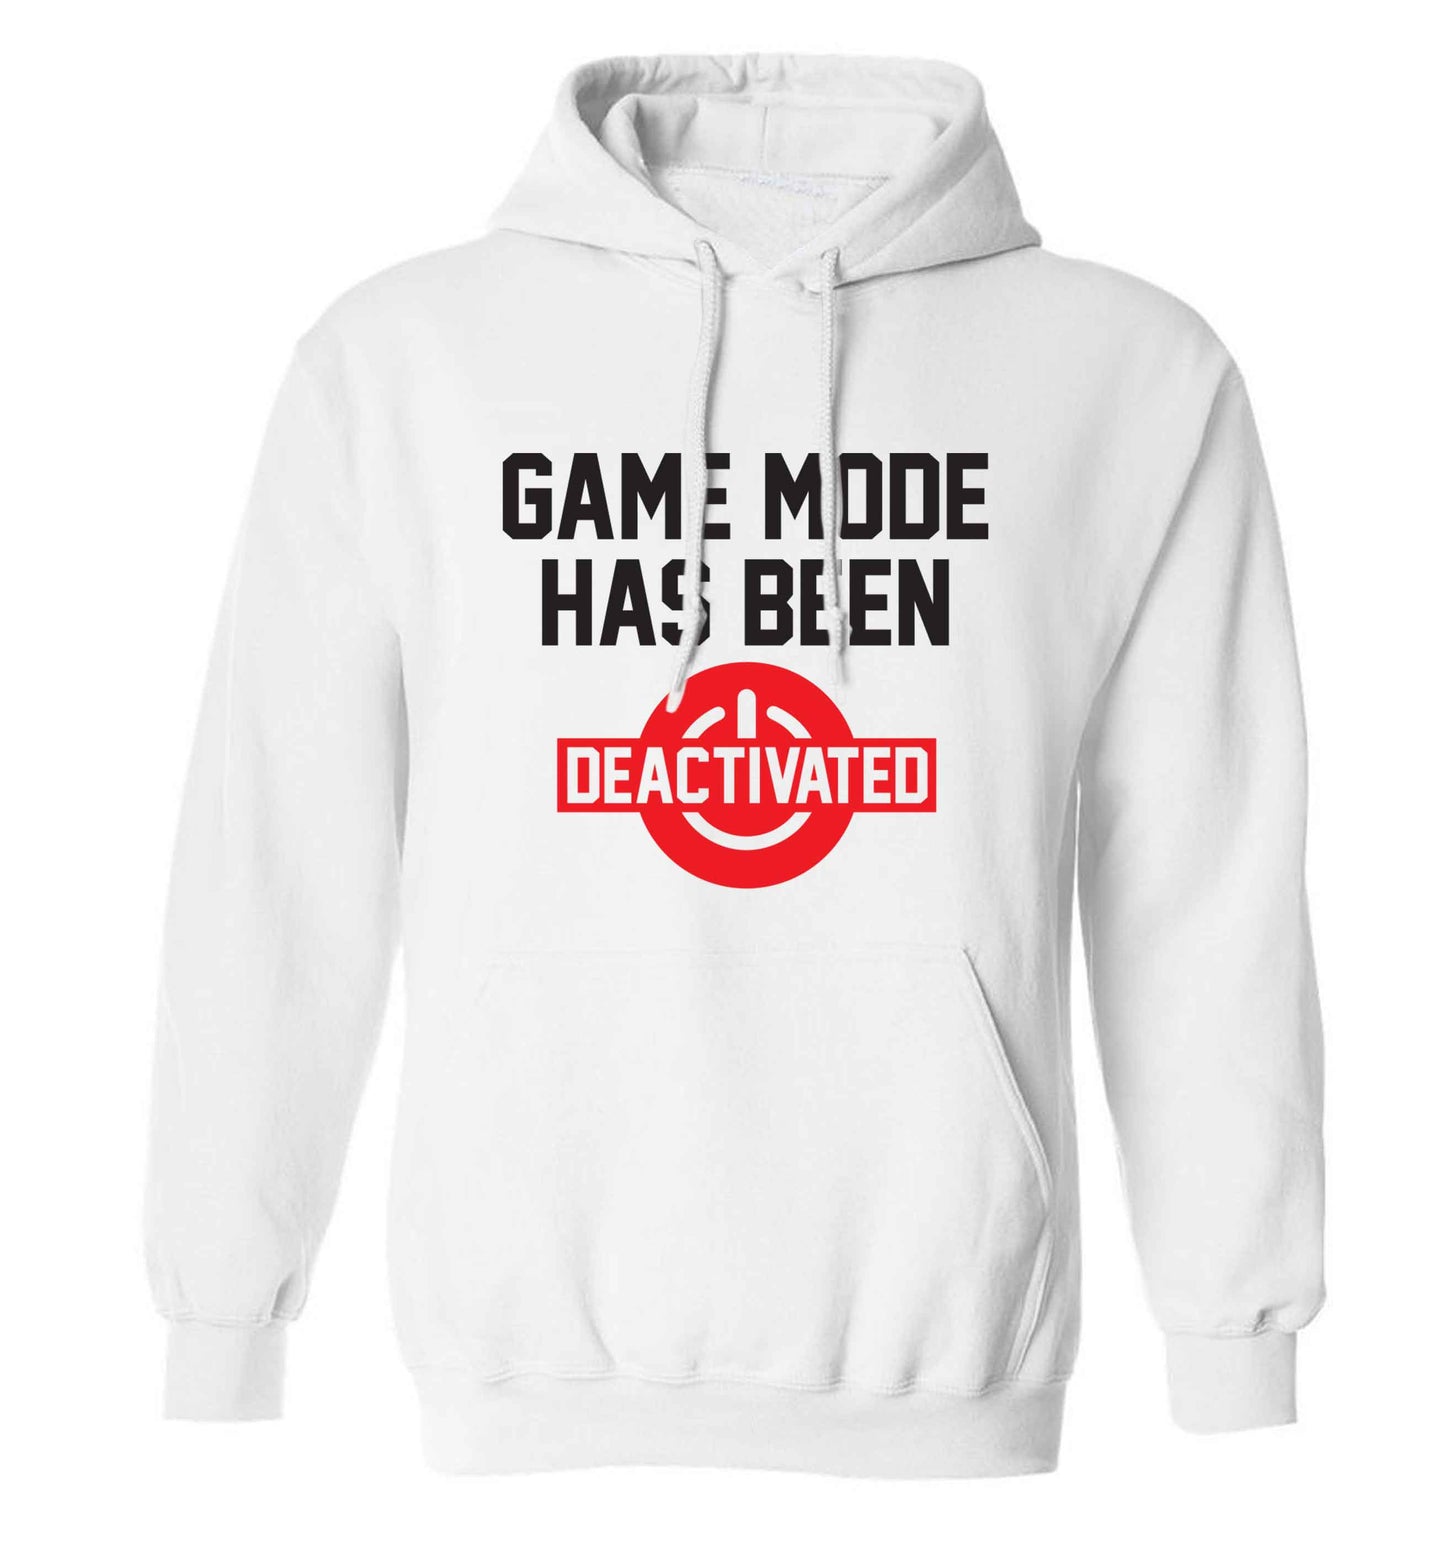 Game Mode Has Been Deactivated adults unisex white hoodie 2XL